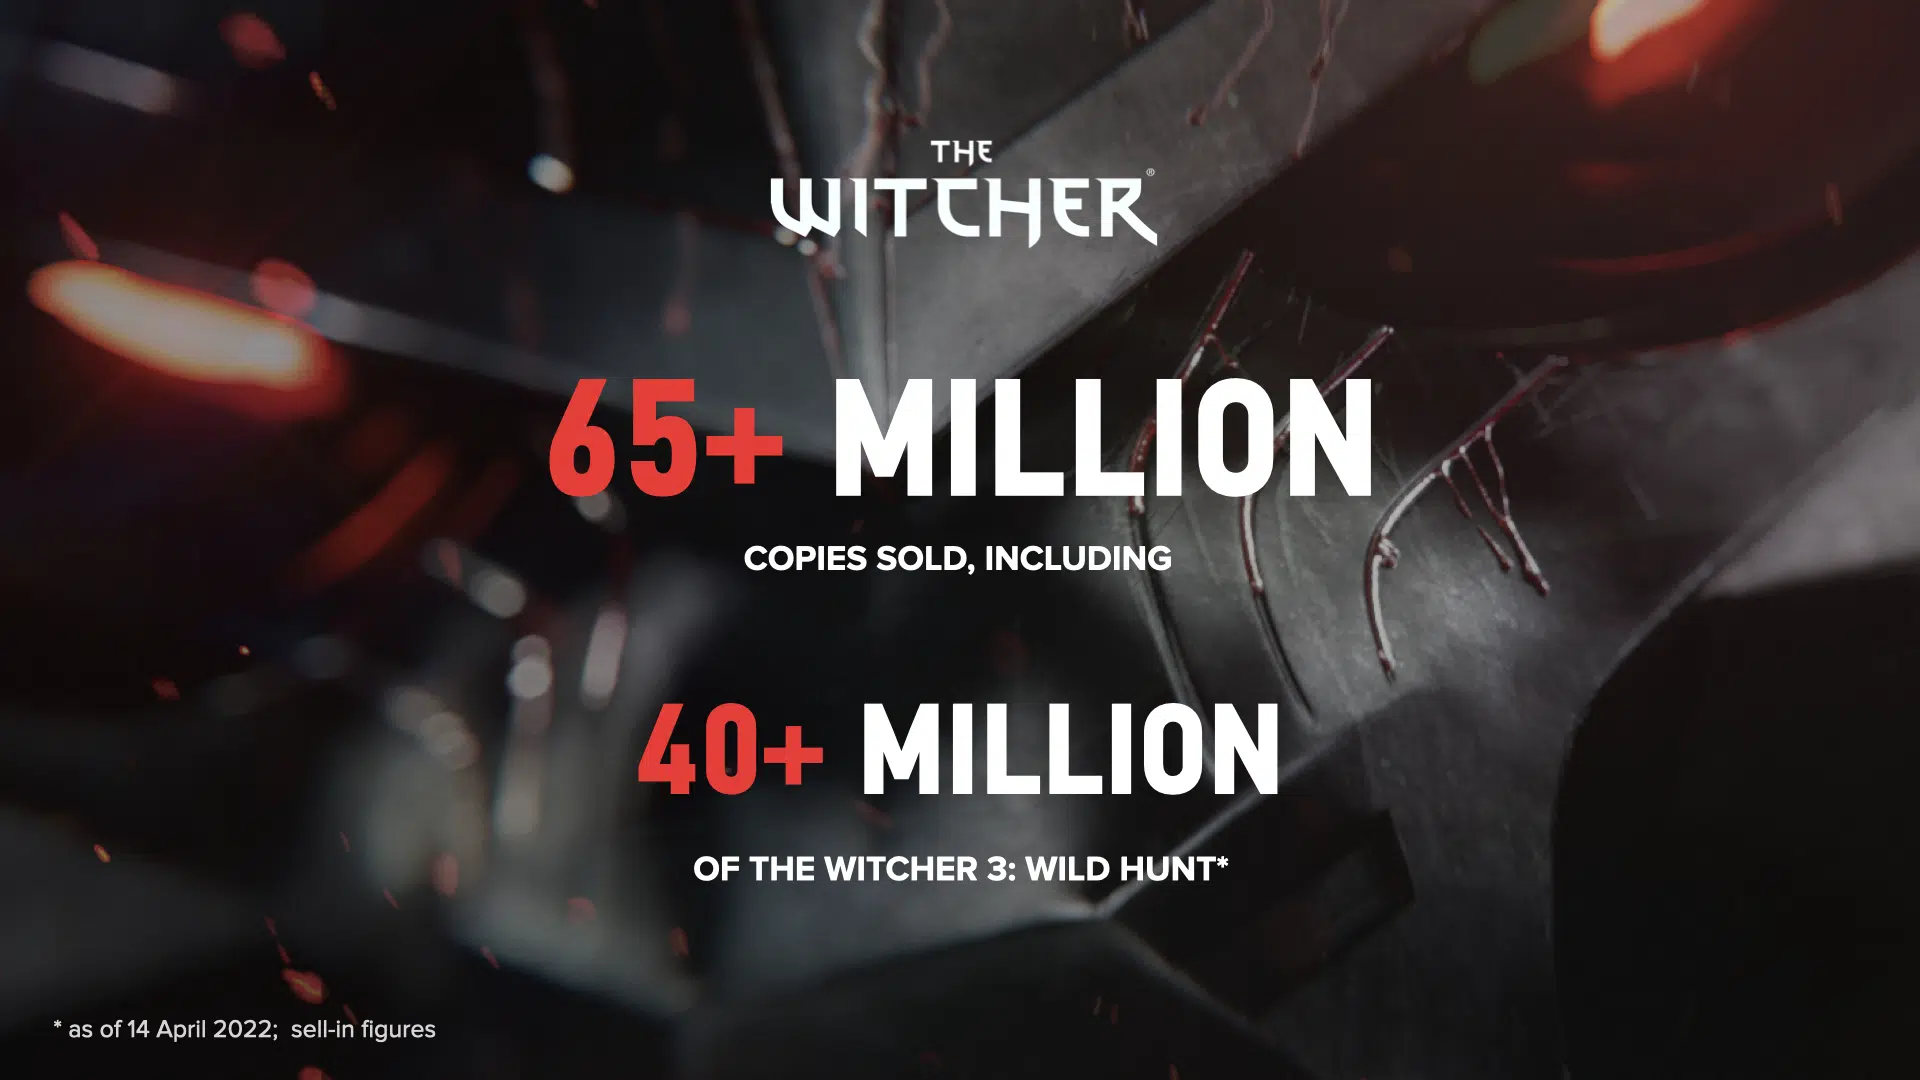 The Witcher 3 sales